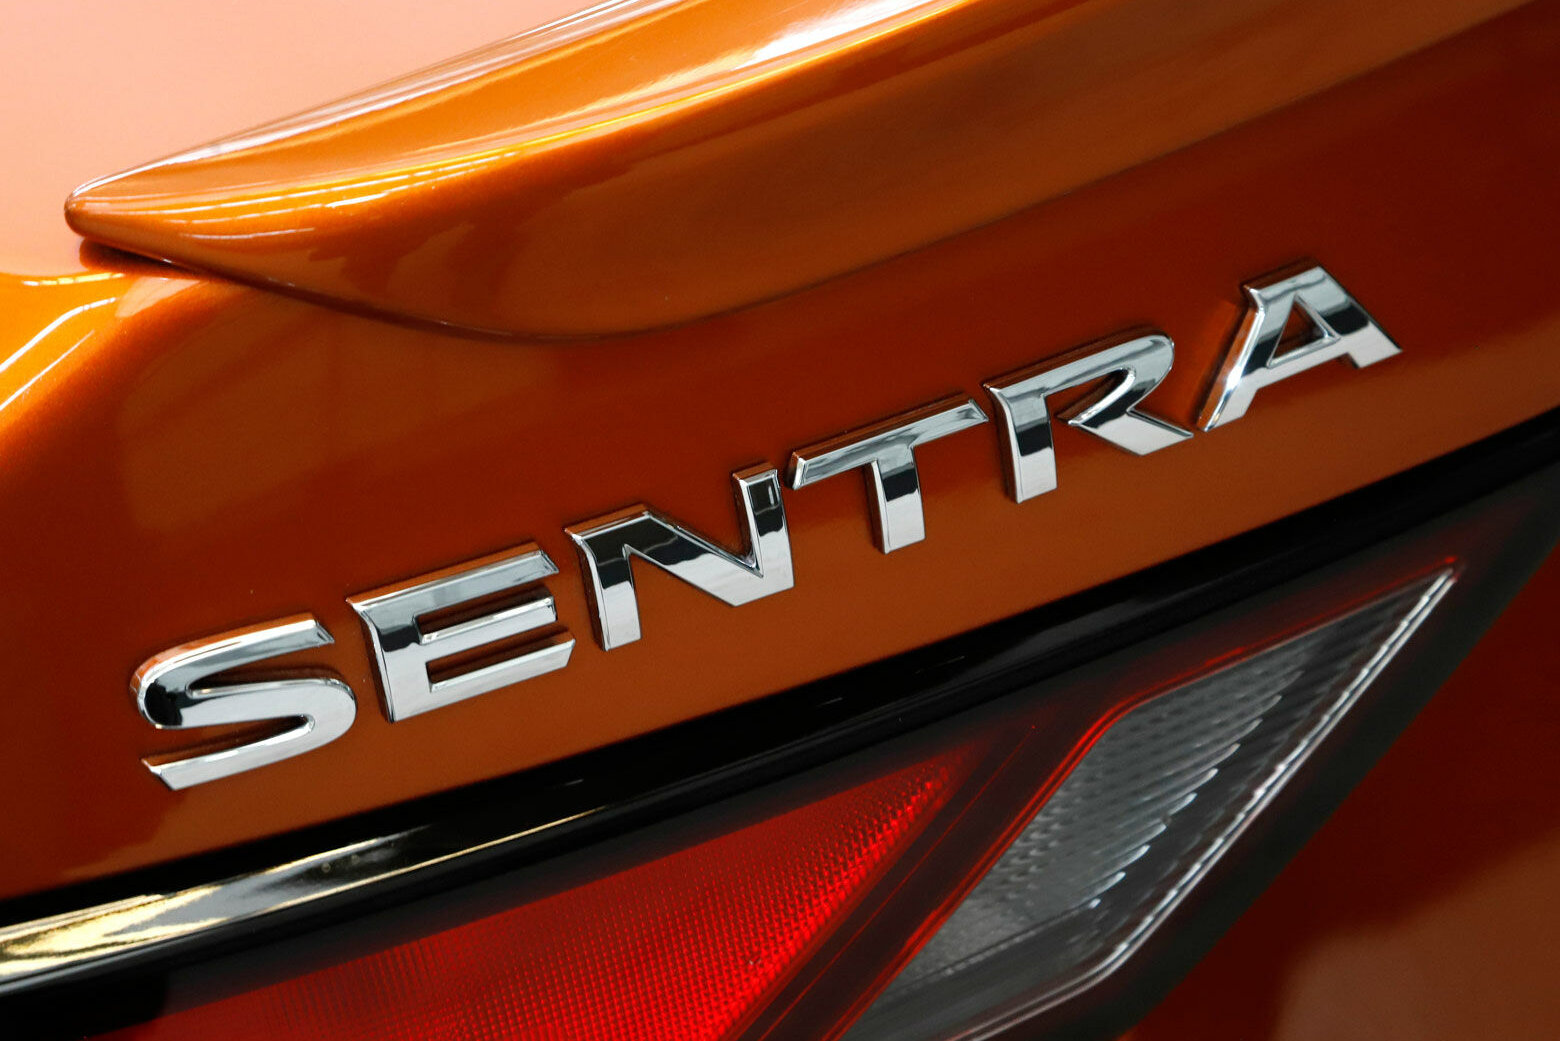 <h3><strong>2020 Nissan Sentra</strong></h3>
<p><strong>Purchase Deal: 0% financing for 60 months and no payments for 90 days</strong></p>
<p>Nissan completely redesigned the compact Sentra for the 2020 model year, giving the sedan updated styling and an interior far more inviting than Sentras of old. The new model comes loaded with safety and driver assistance technology, including forward and reverse automatic emergency braking.</p>
<p>The <a href="https://cars.usnews.com/cars-trucks/nissan/sentra">2020 Nissan Sentra</a> holds a spot at the bottom of our <a href="https://cars.usnews.com/cars-trucks/rankings/compact-cars">compact car ranking</a>, though that’s more a statement of the strength of the segment than an indictment of the Nissan. Compared to rivals, however, the Sentra’s 149-horsepower engine and continuously variable automatic transmission (CVT) feel unrefined. The sedan&#8217;s sweeping coupe-like roofline compromises its rear-seat space.</p>
<p>Depending on the model you choose, you’ll get either a 7-inch touch-screen with a four-speaker audio system or an 8-inch touch-screen infotainment system that supports <a href="https://cars.usnews.com/cars-trucks/what-is-apple-carplay">Apple CarPlay</a> and <a href="https://cars.usnews.com/cars-trucks/what-is-android-auto">Android Auto</a>.</p>
<p>Nissan’s Fourth of July Sentra deal offers zero percent financing for five years. Though no payments are due for 90 days from purchase, it’s a good idea to start paying as soon as you can, so your payments have a better chance of keeping up with the car’s depreciation.</p>
